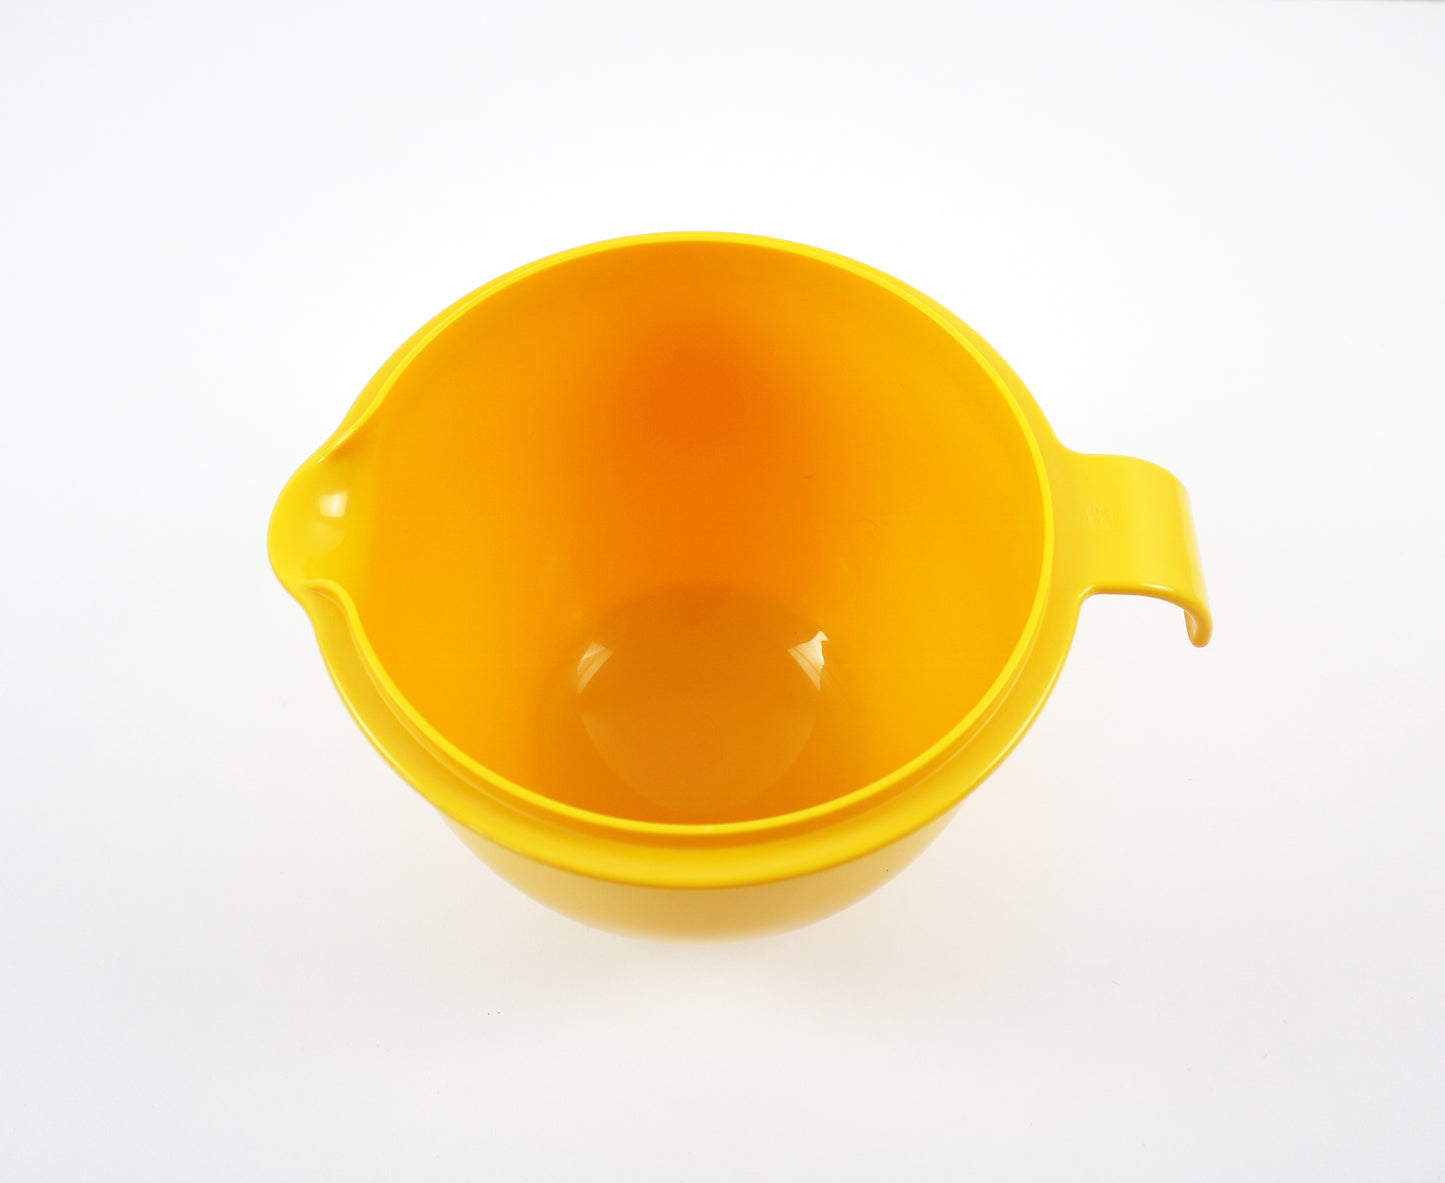 Chef Line yellow mixing bowl by Bruno Gecchelin for Guzzini Italy - retired colour